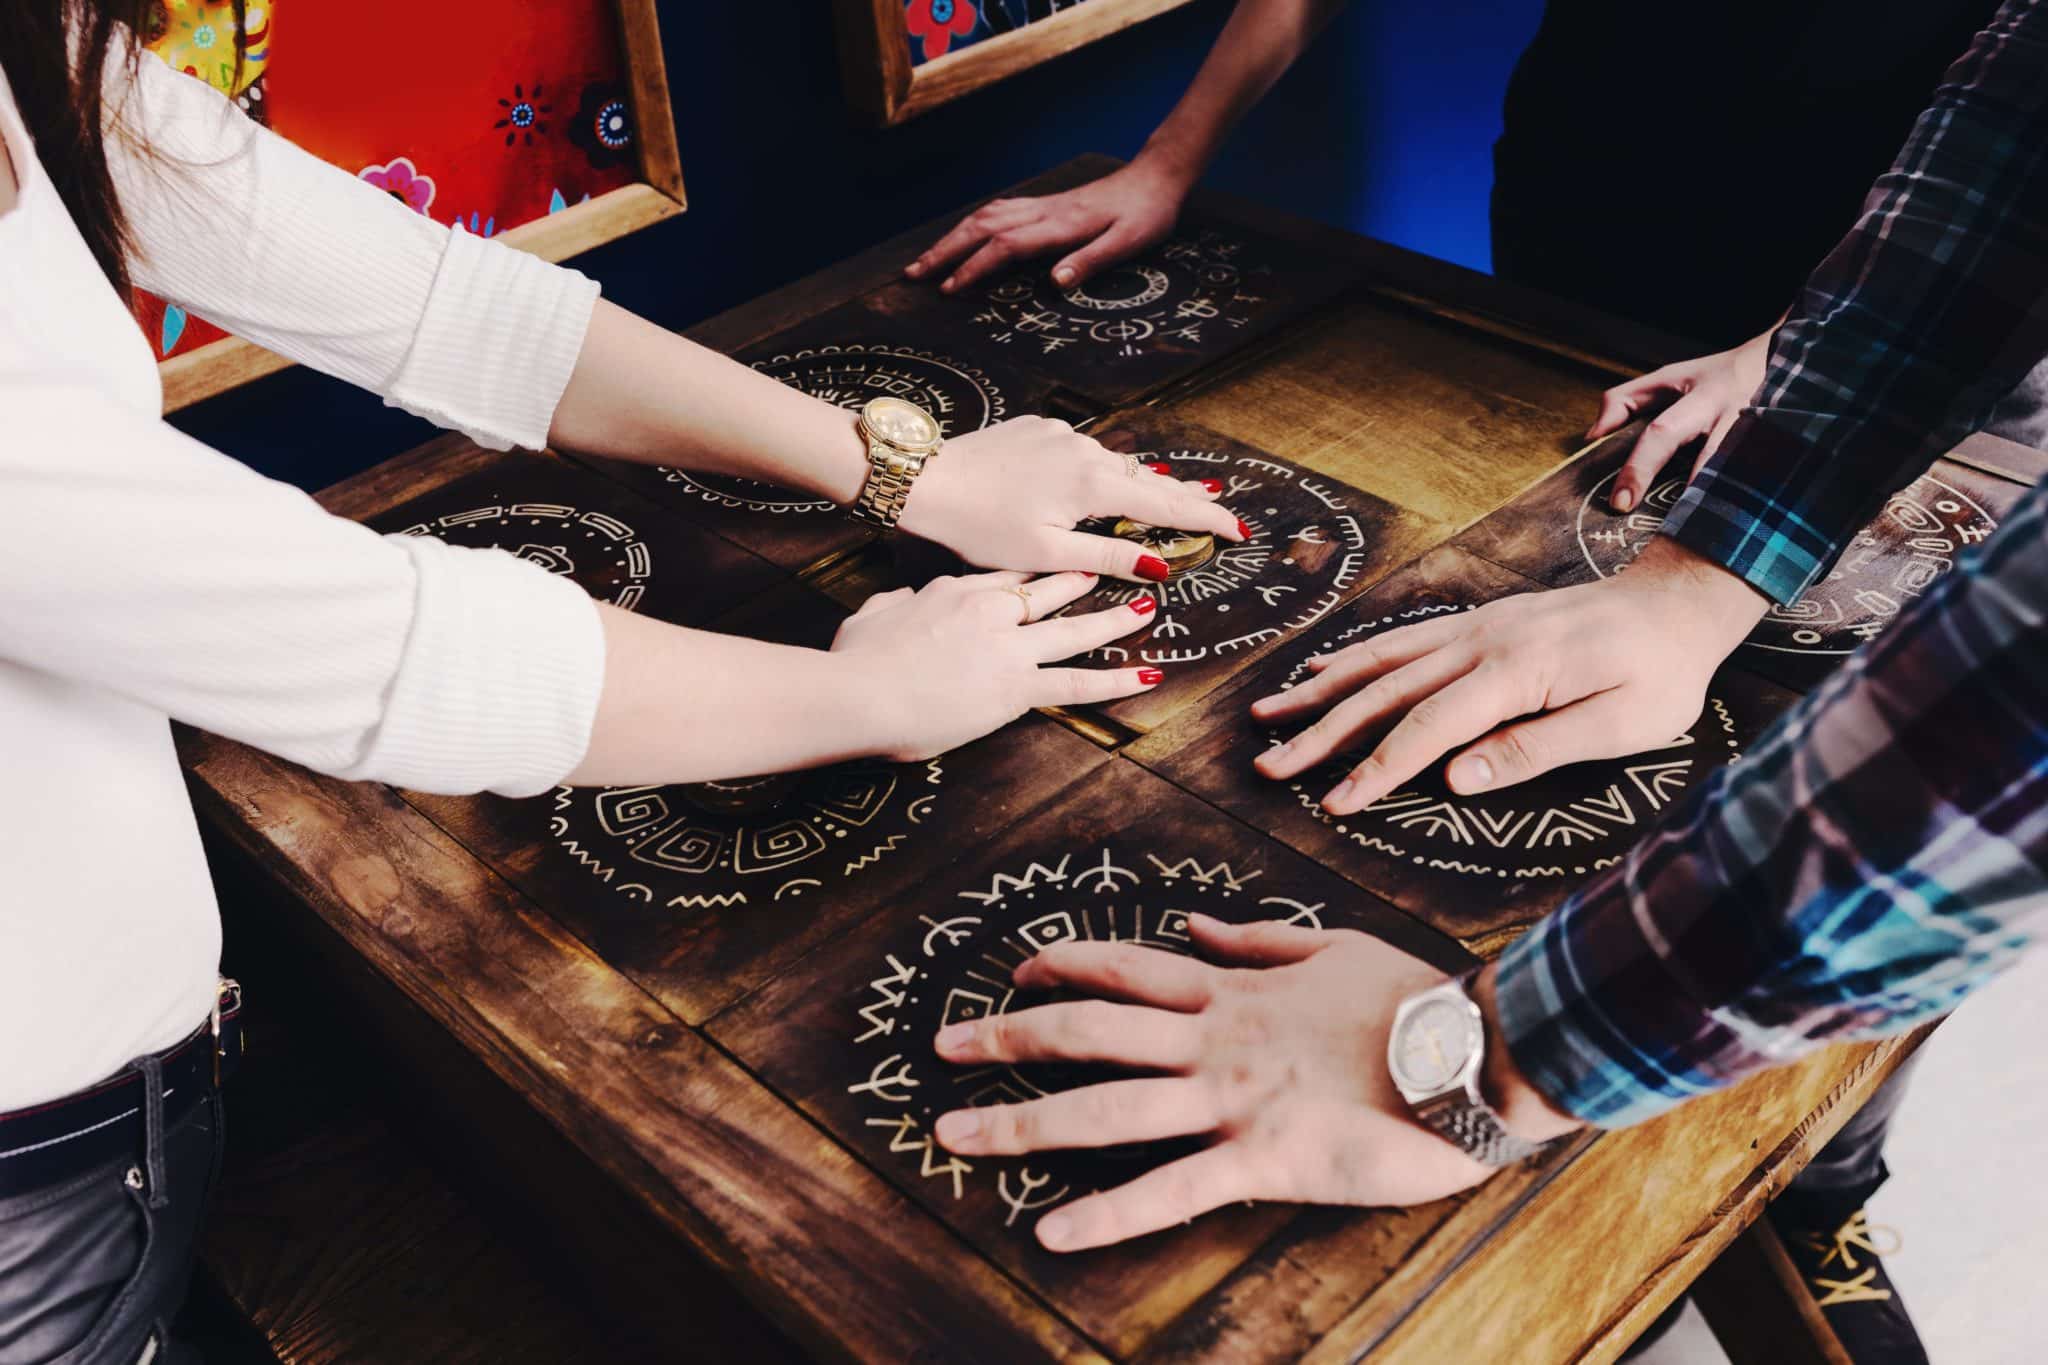 The hands of young people move pieces of the Mexican style trying to get out of the trap, escape the room game concept